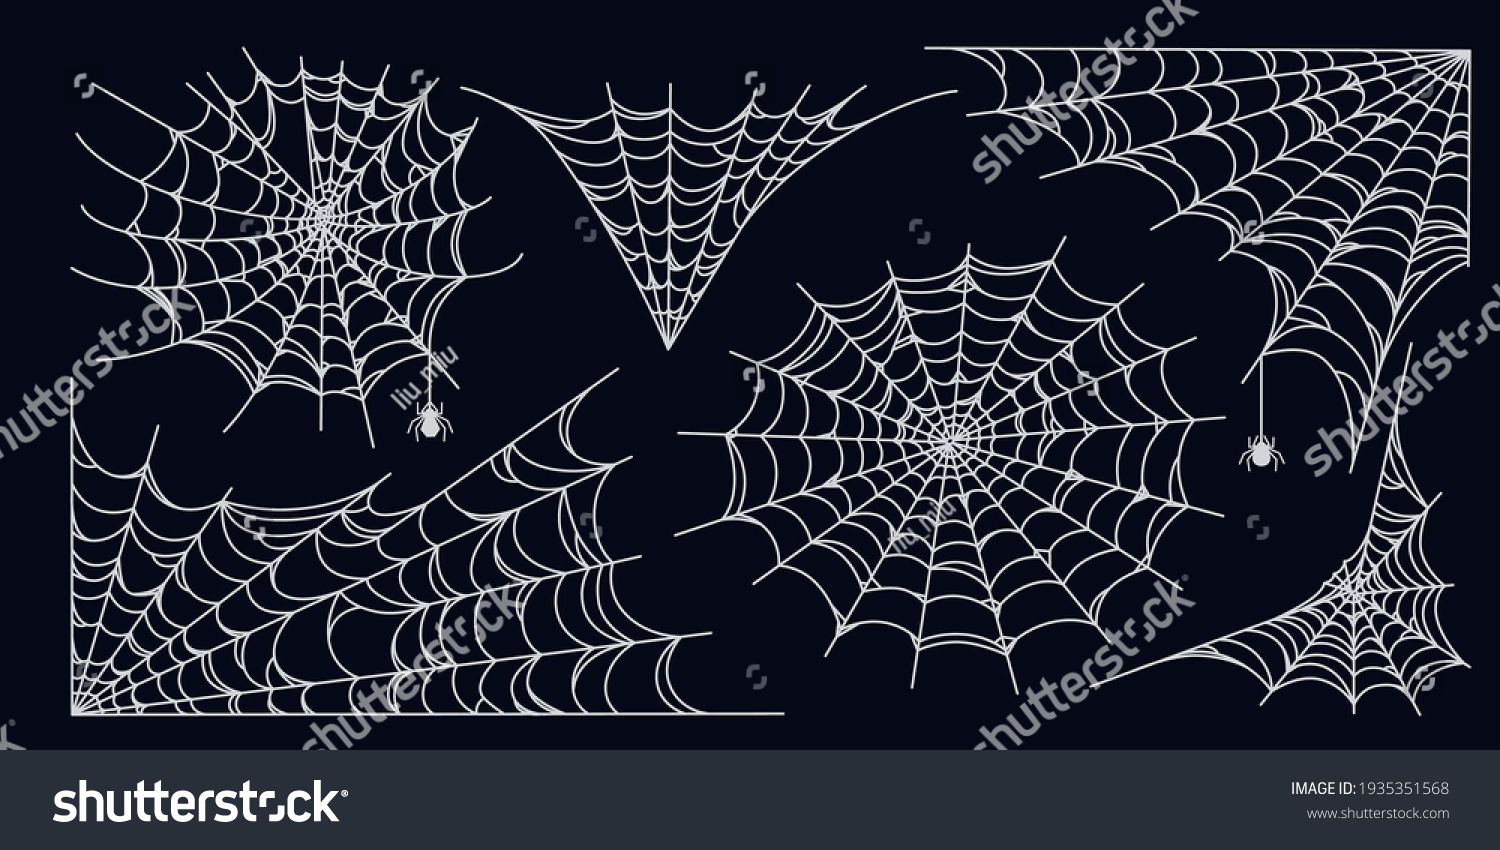 Spider web set isolated on dark background. Spooky Halloween cobwebs with spiders. Outline vector illustration #1935351568